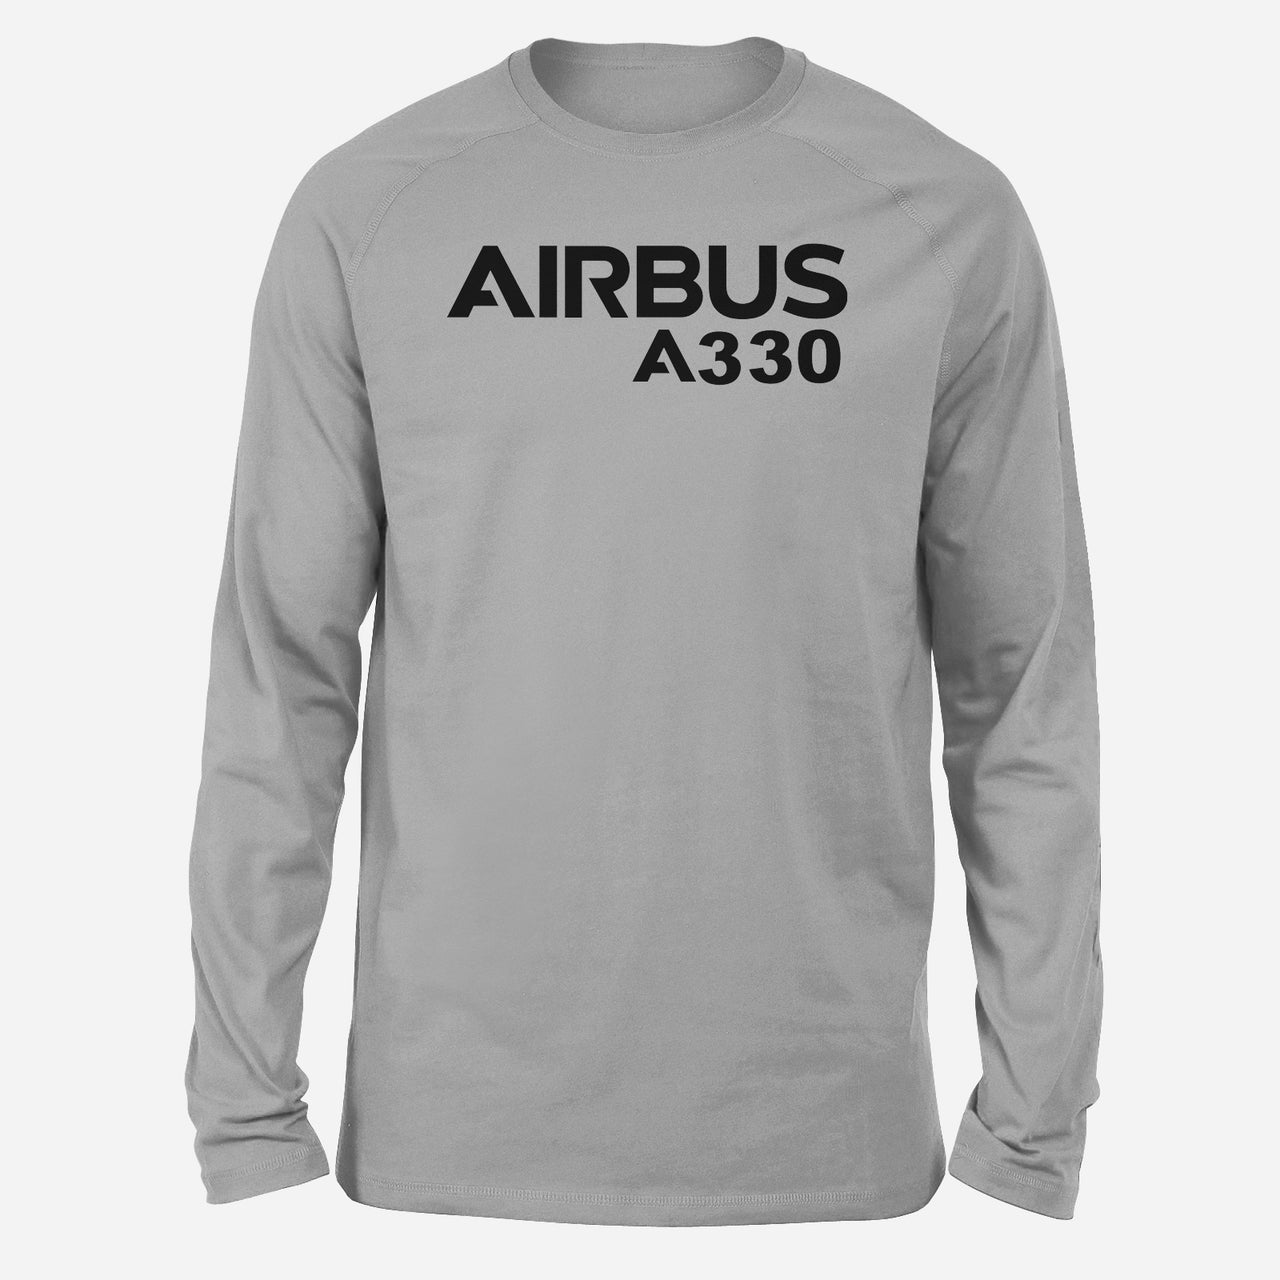 Airbus A330 & Text Designed Long-Sleeve T-Shirts